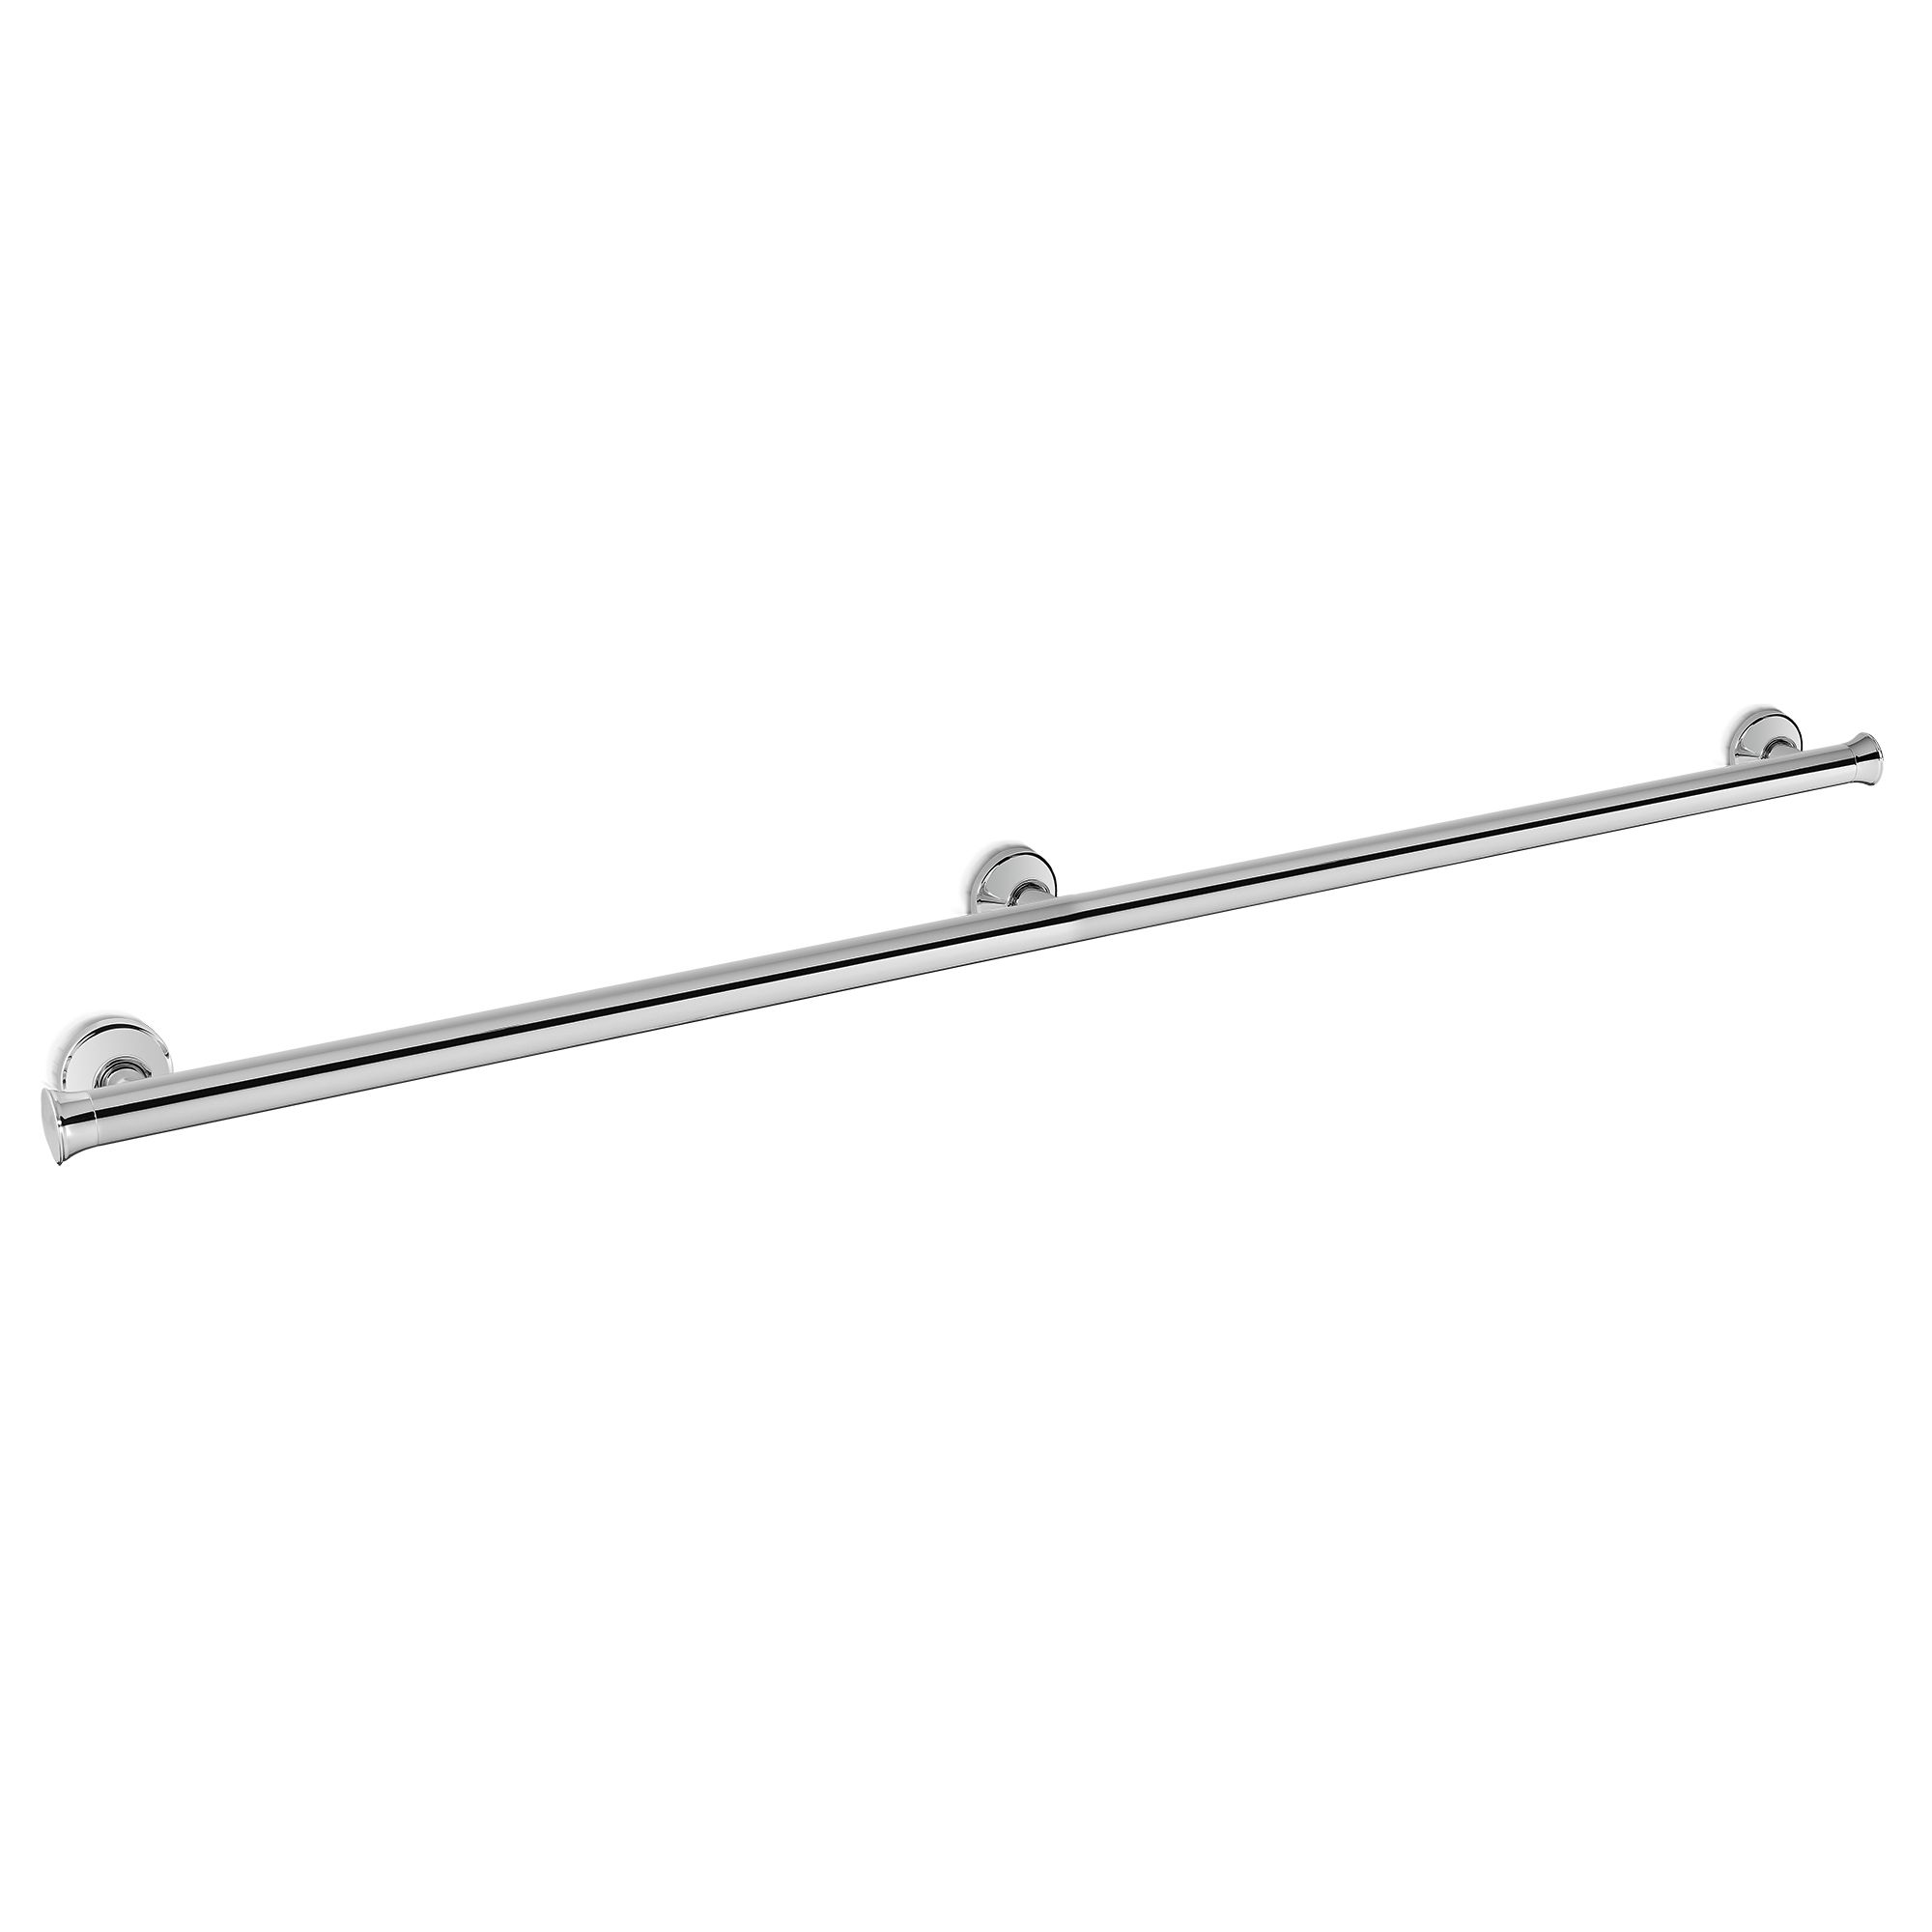 Transitional Collection Series A 42" Grab Bar